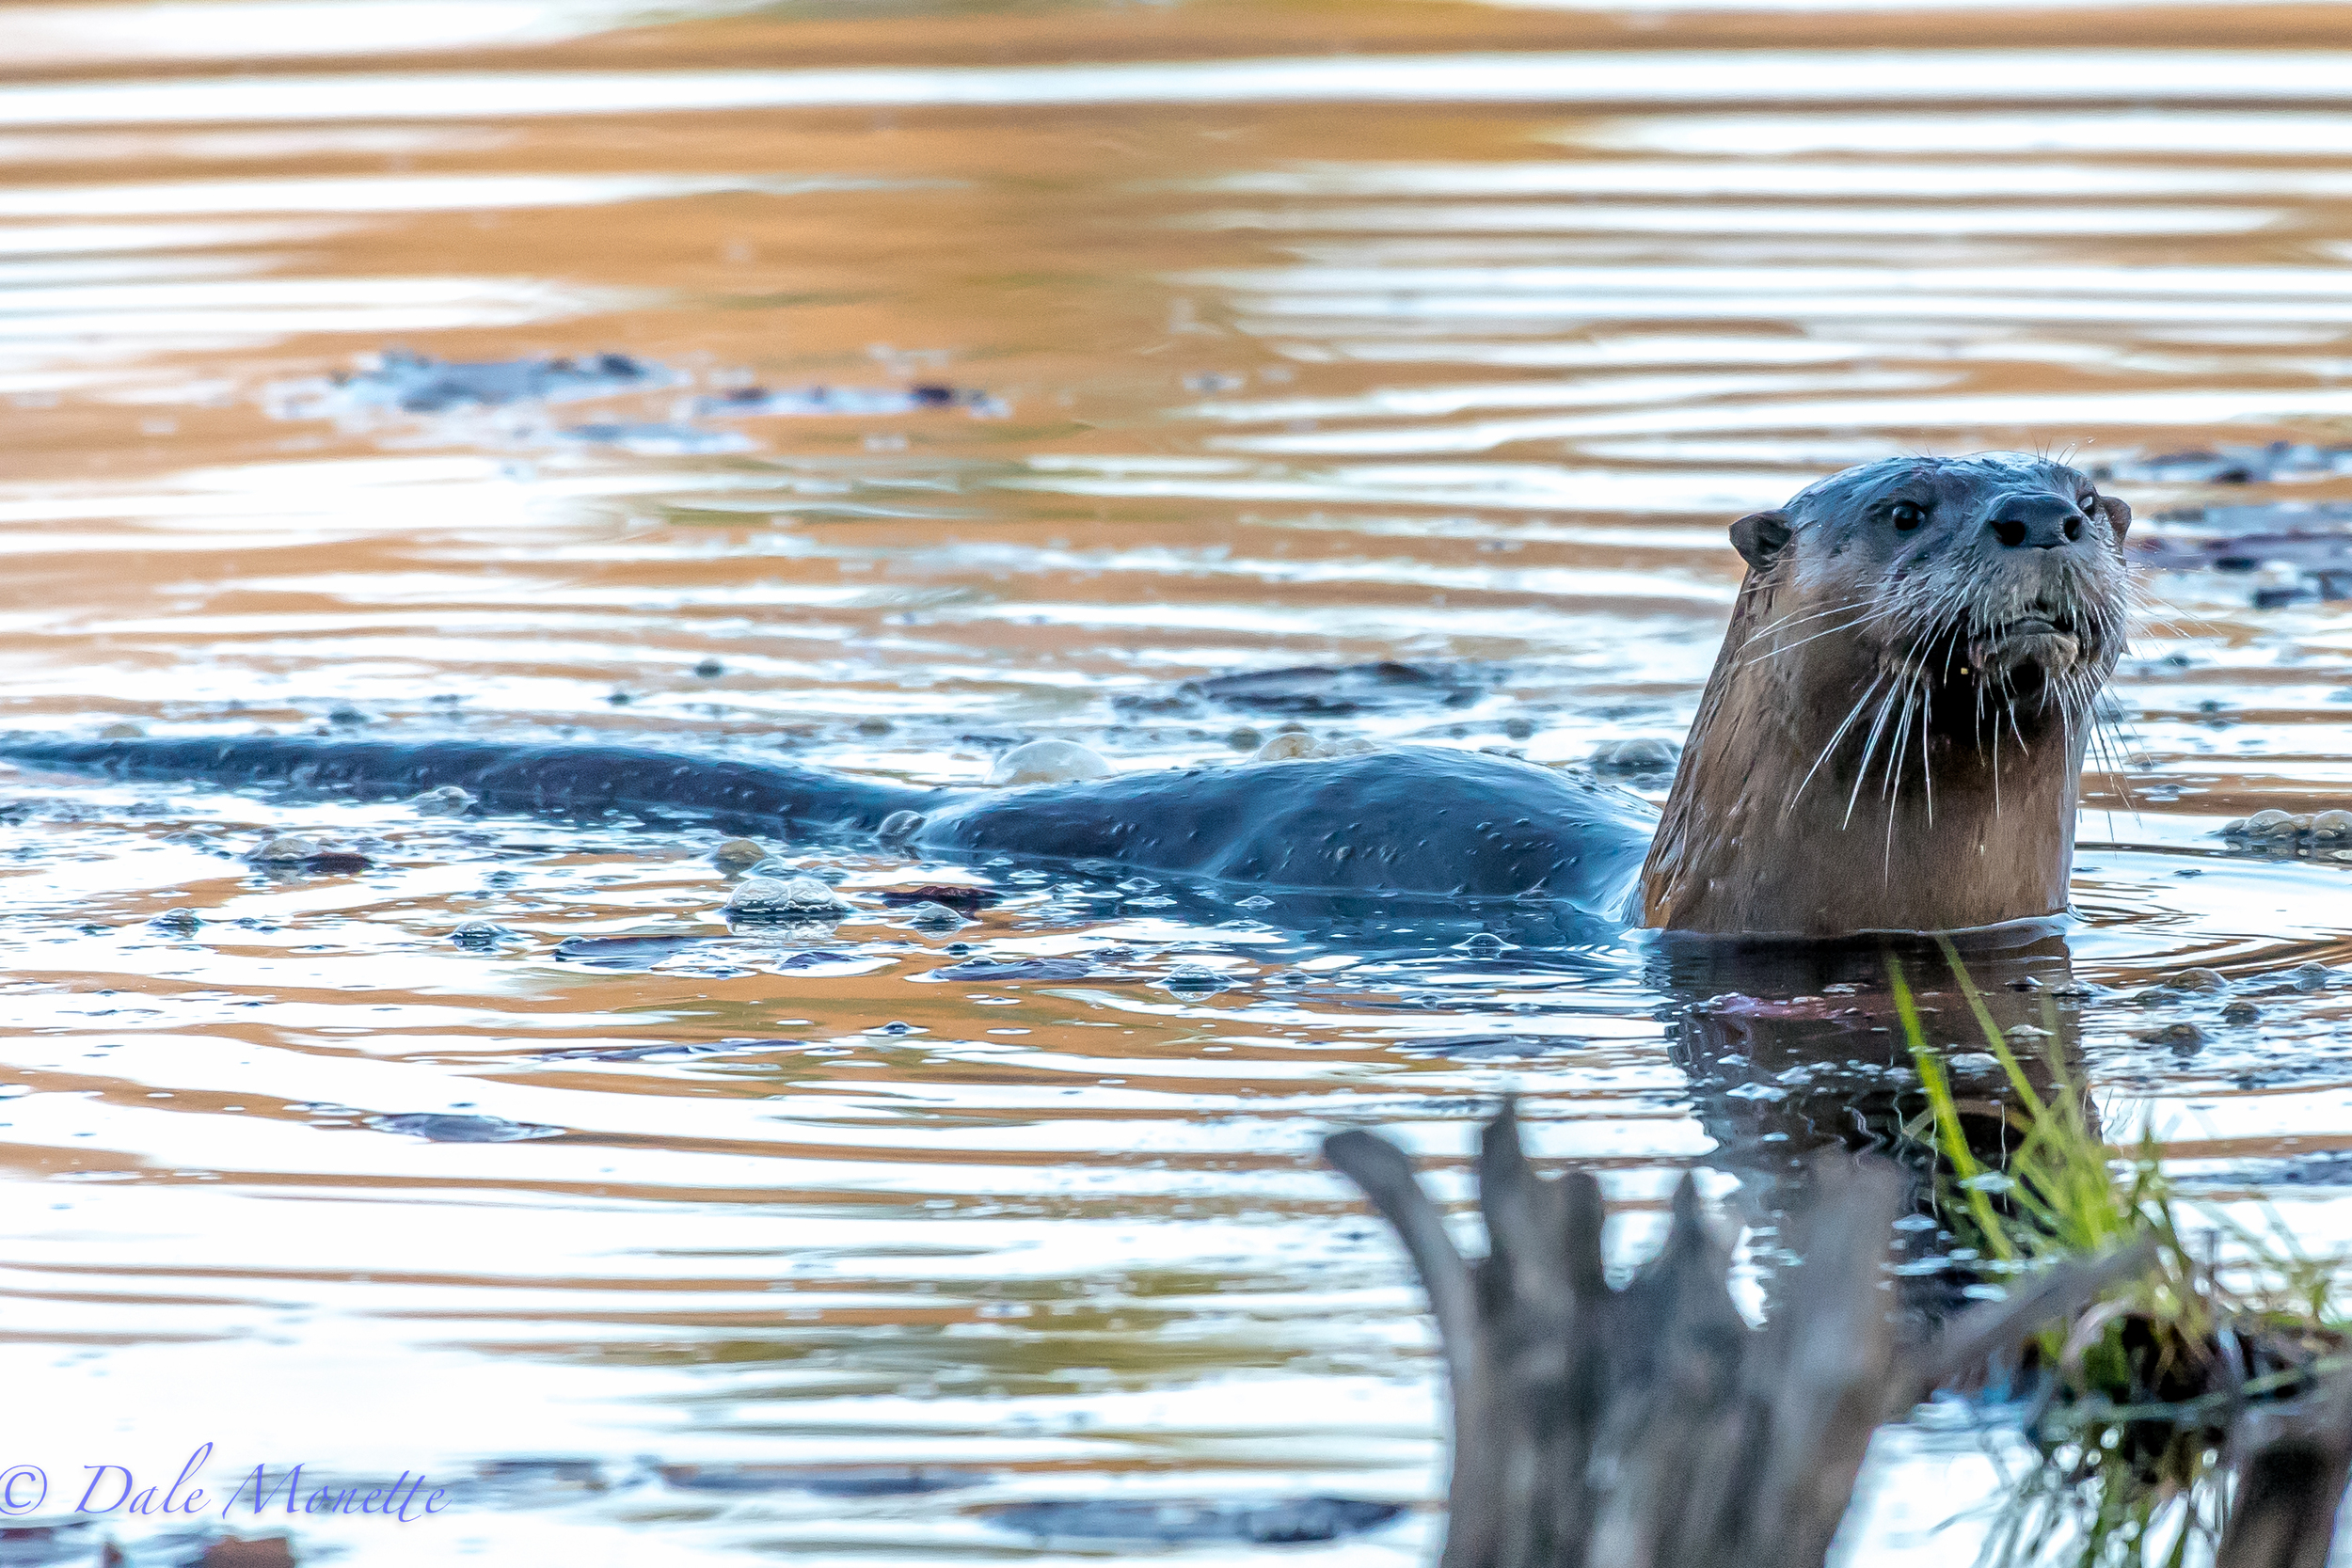   Five river otters magically appeared while I was sitting at the end of a swamp in the Quabbin. I watched them tear the place up for 90 minutes catching fish and playing. &nbsp;They also came out of the water to mark their territory 3 times in the 9